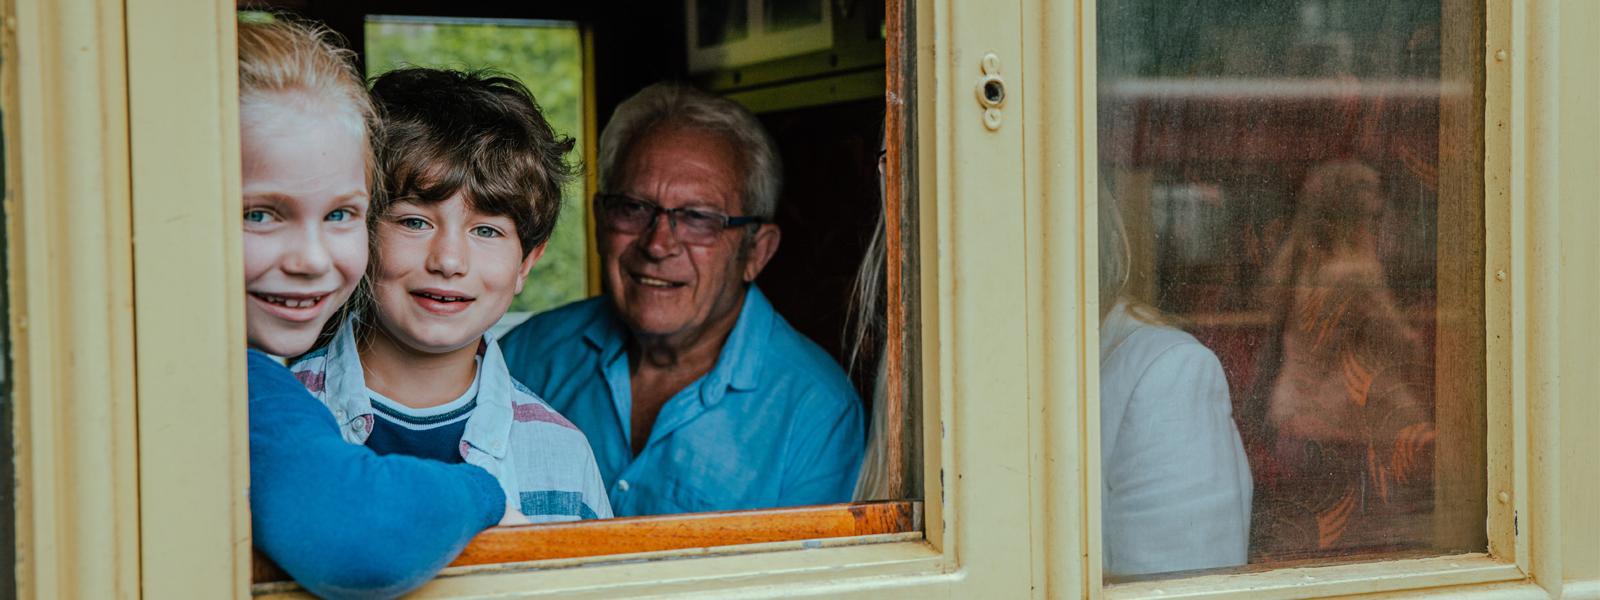 A family on board the Isle of Man Steam Railway, the kids looking out of the window towards the camera